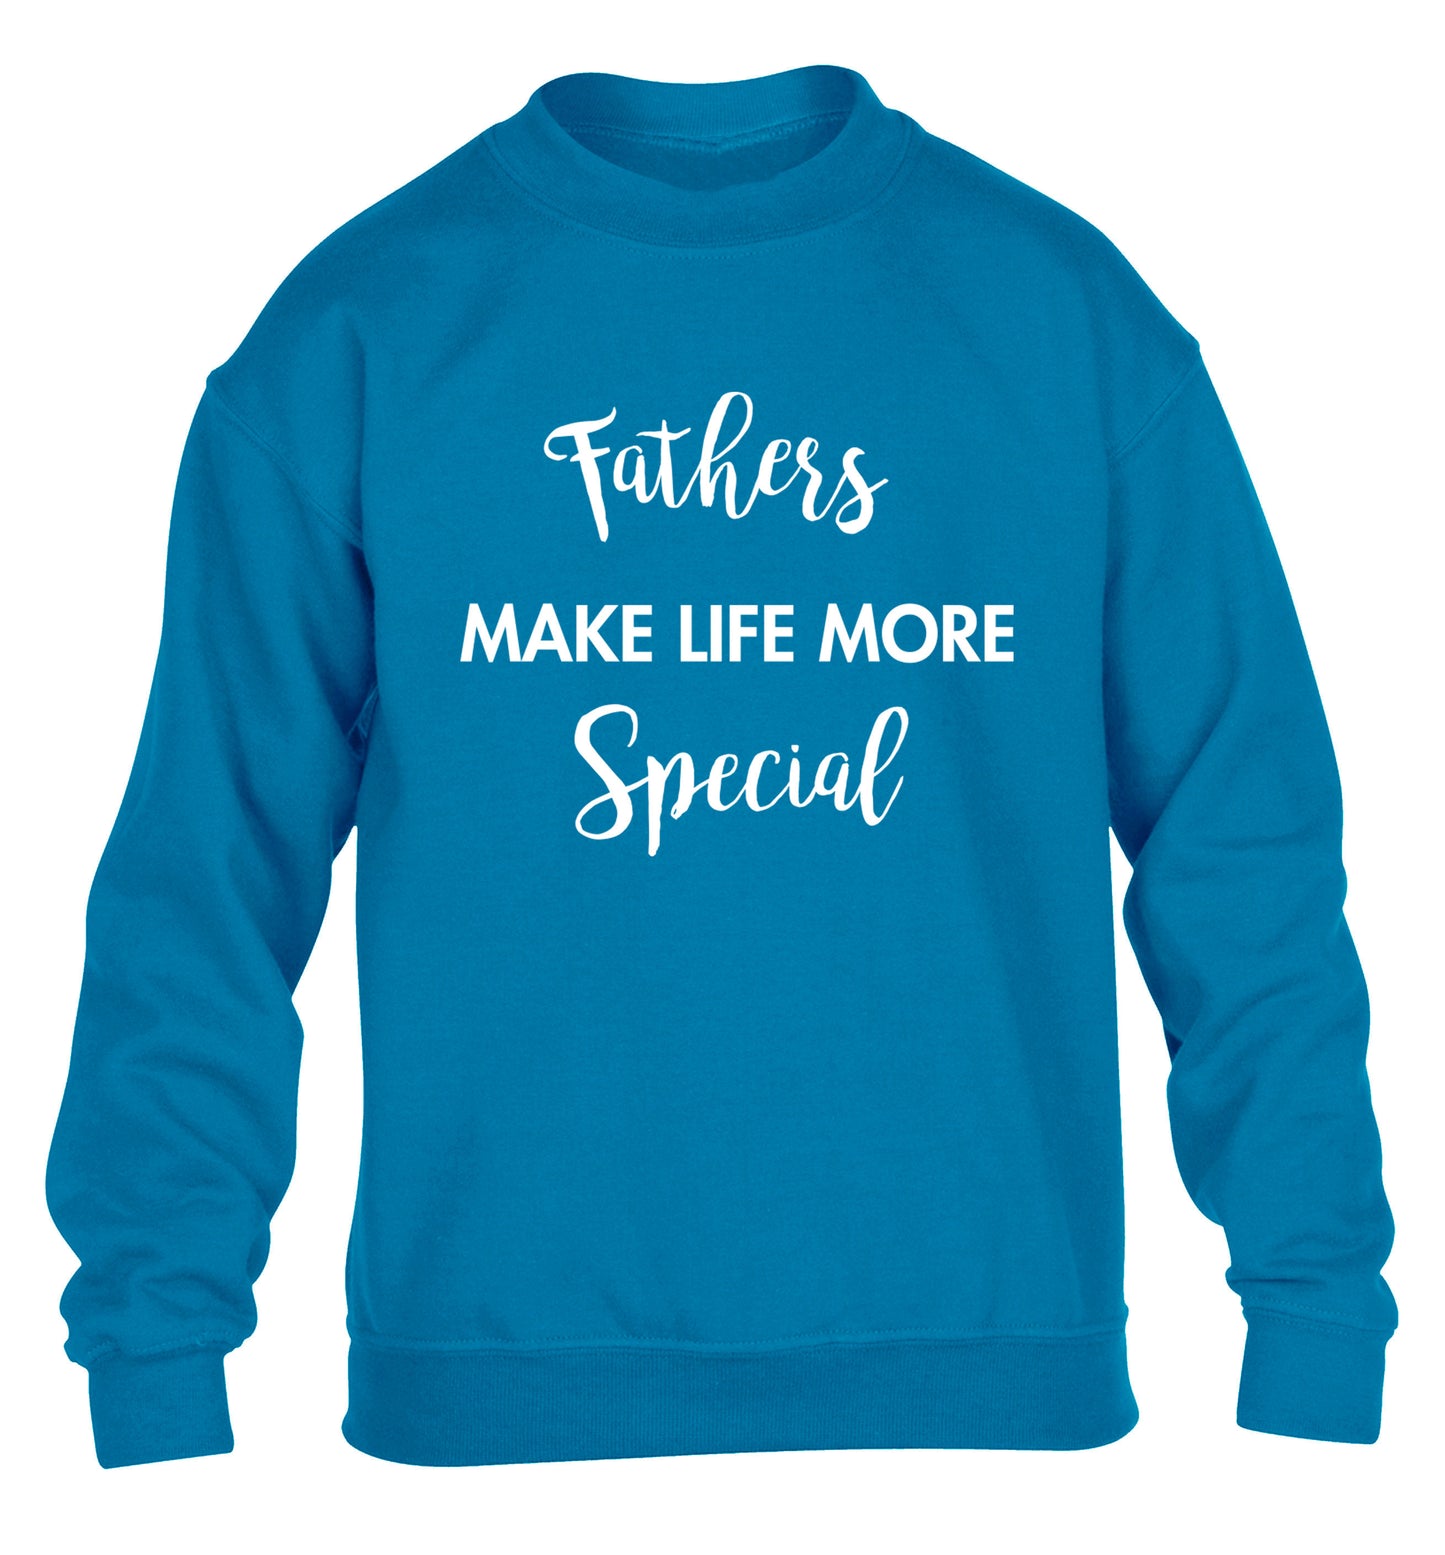 Fathers make life more special children's blue sweater 12-14 Years